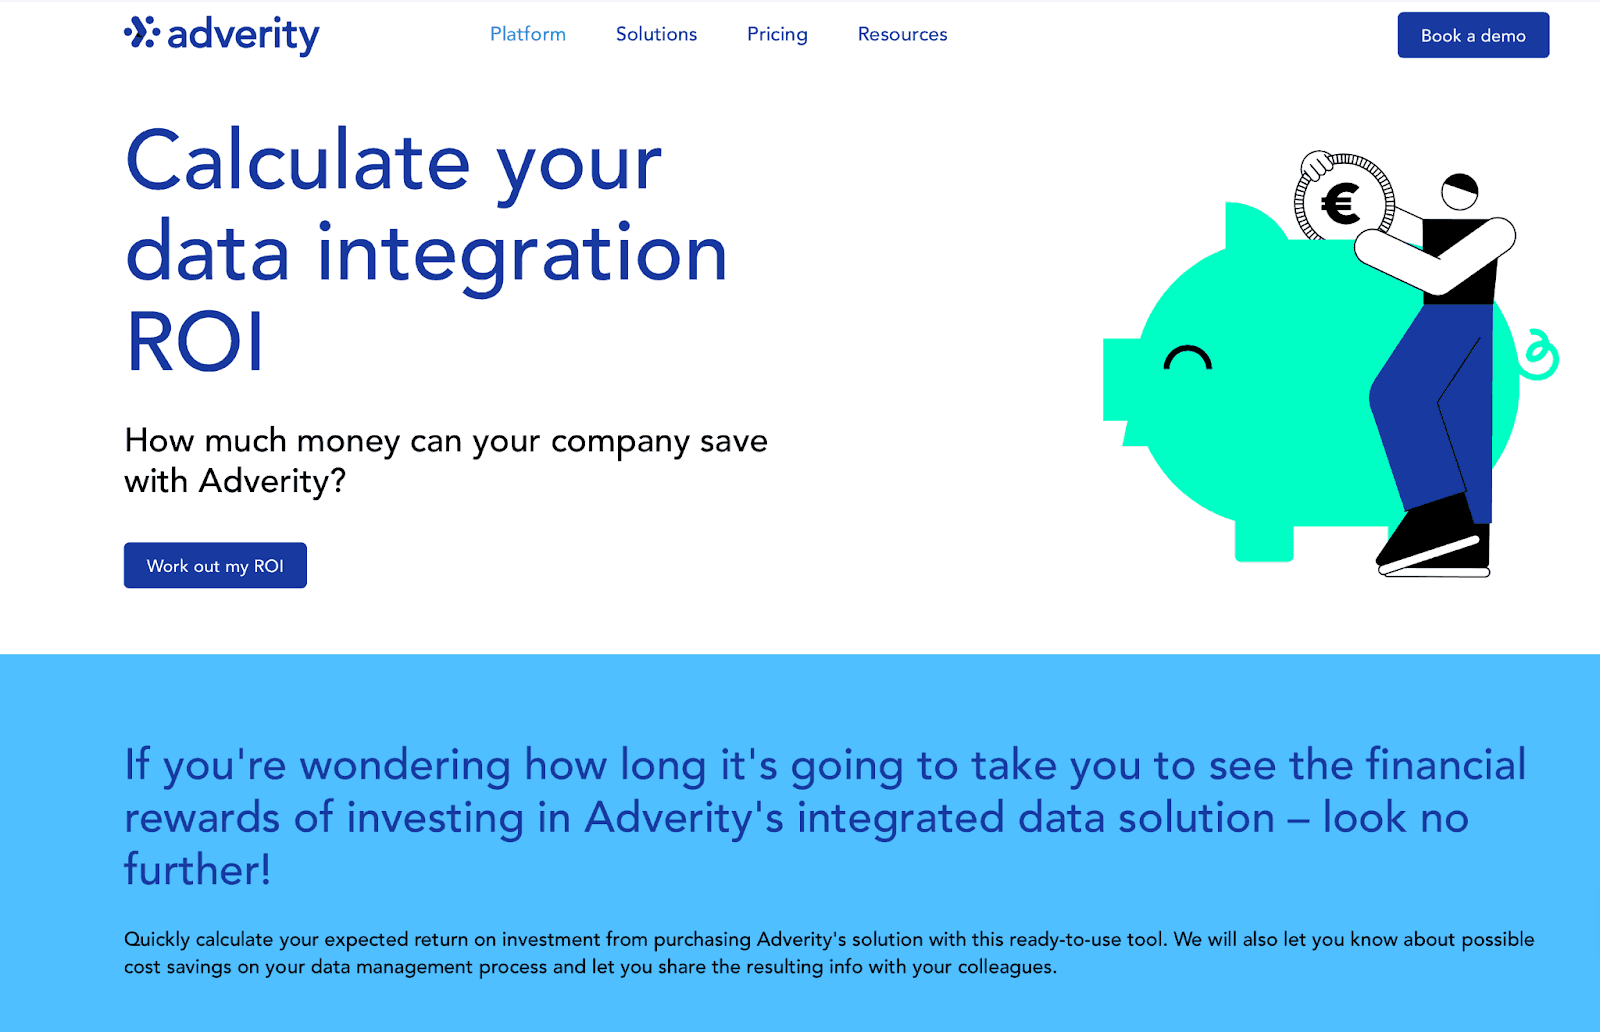 Adverity website - Calculate your data integration ROI